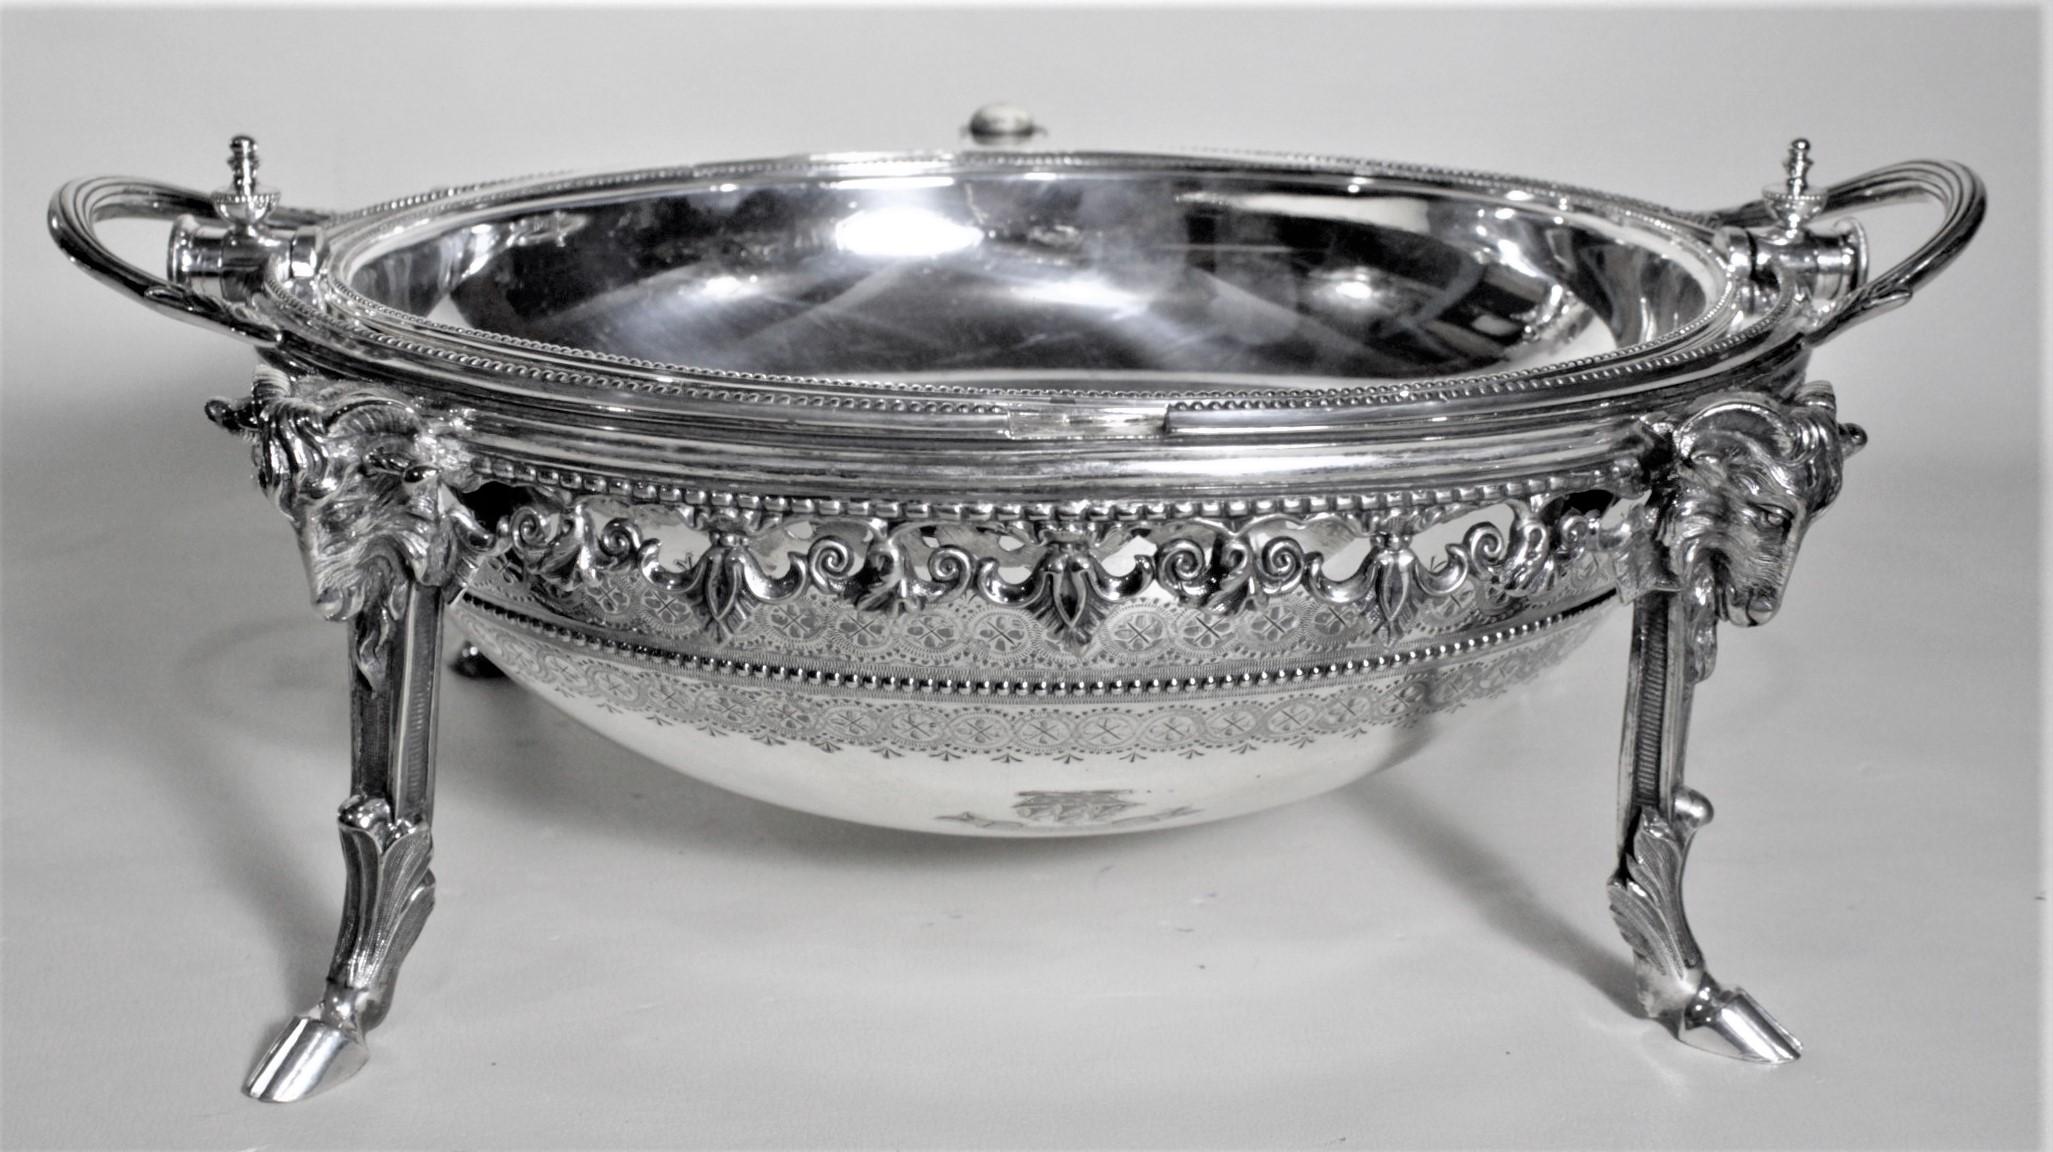 Antique English Silver Plated Revolving Breakfast Dome with Figural Ram Accents For Sale 1